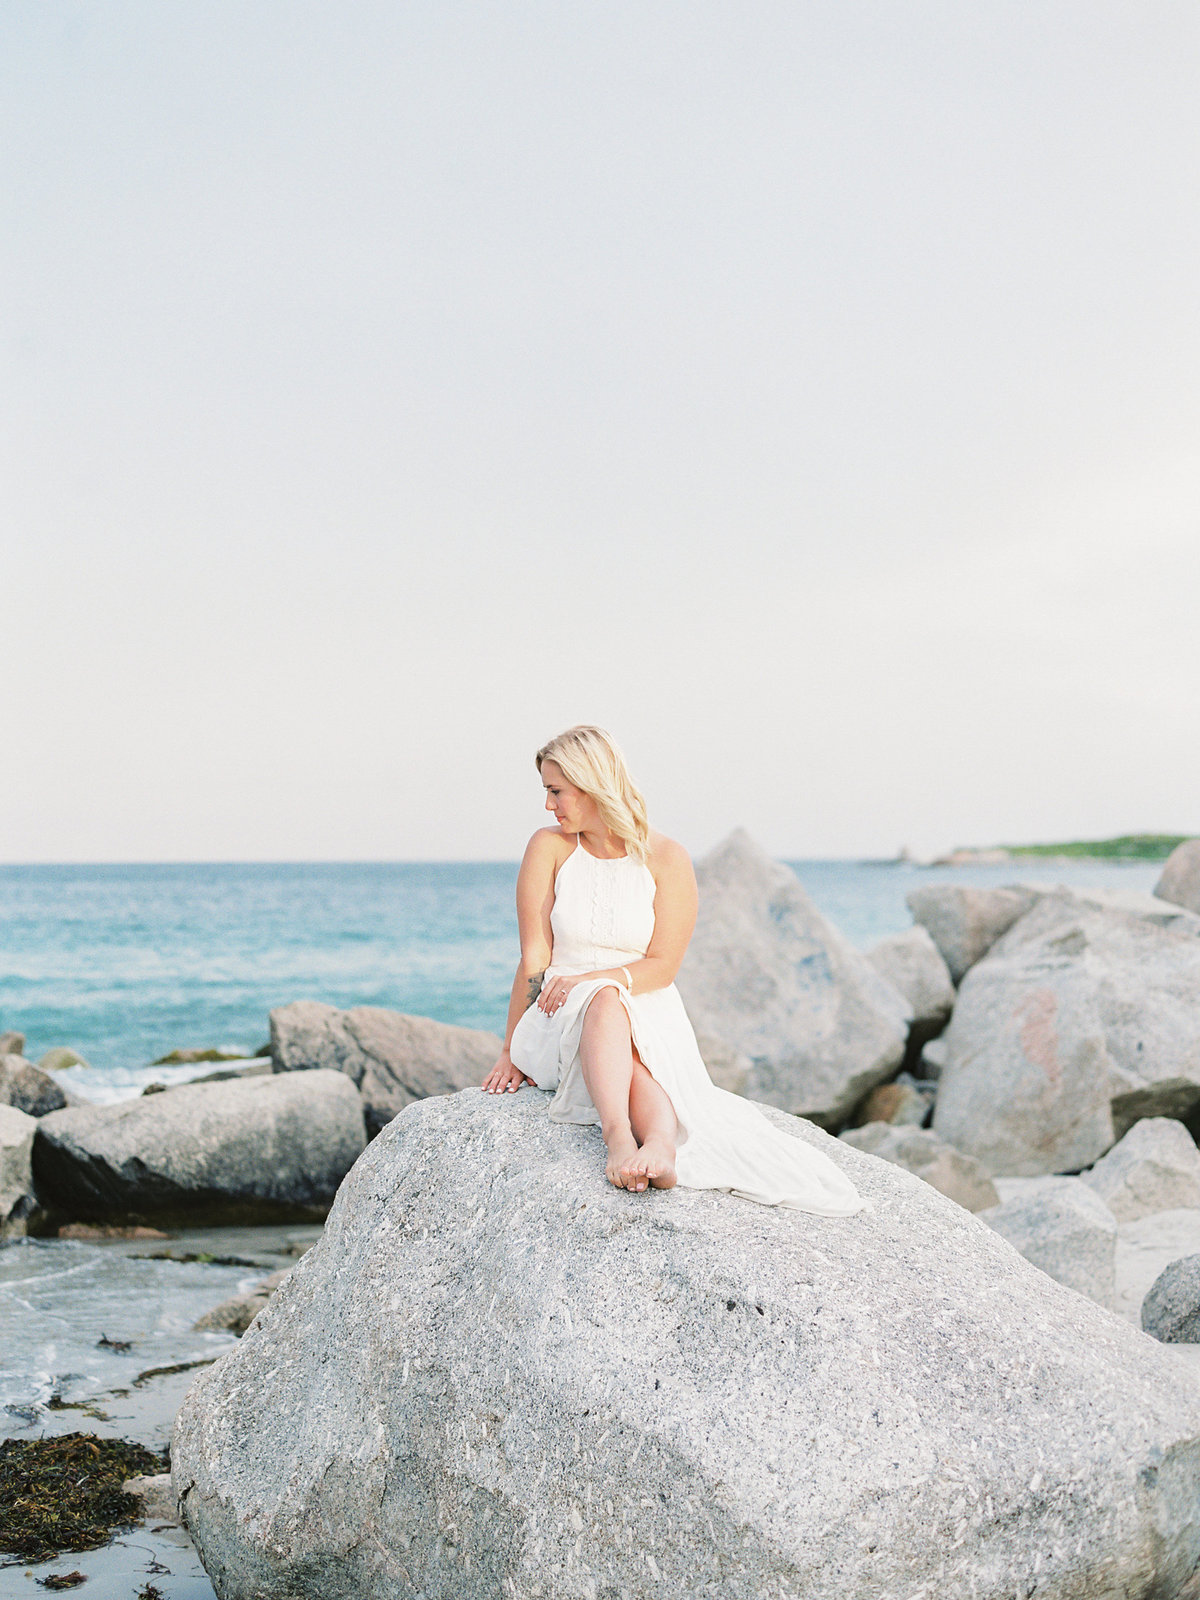 Jacqueline Anne Photography  - Hailey and Shea - Crystal Crescent Beach Engagement-128